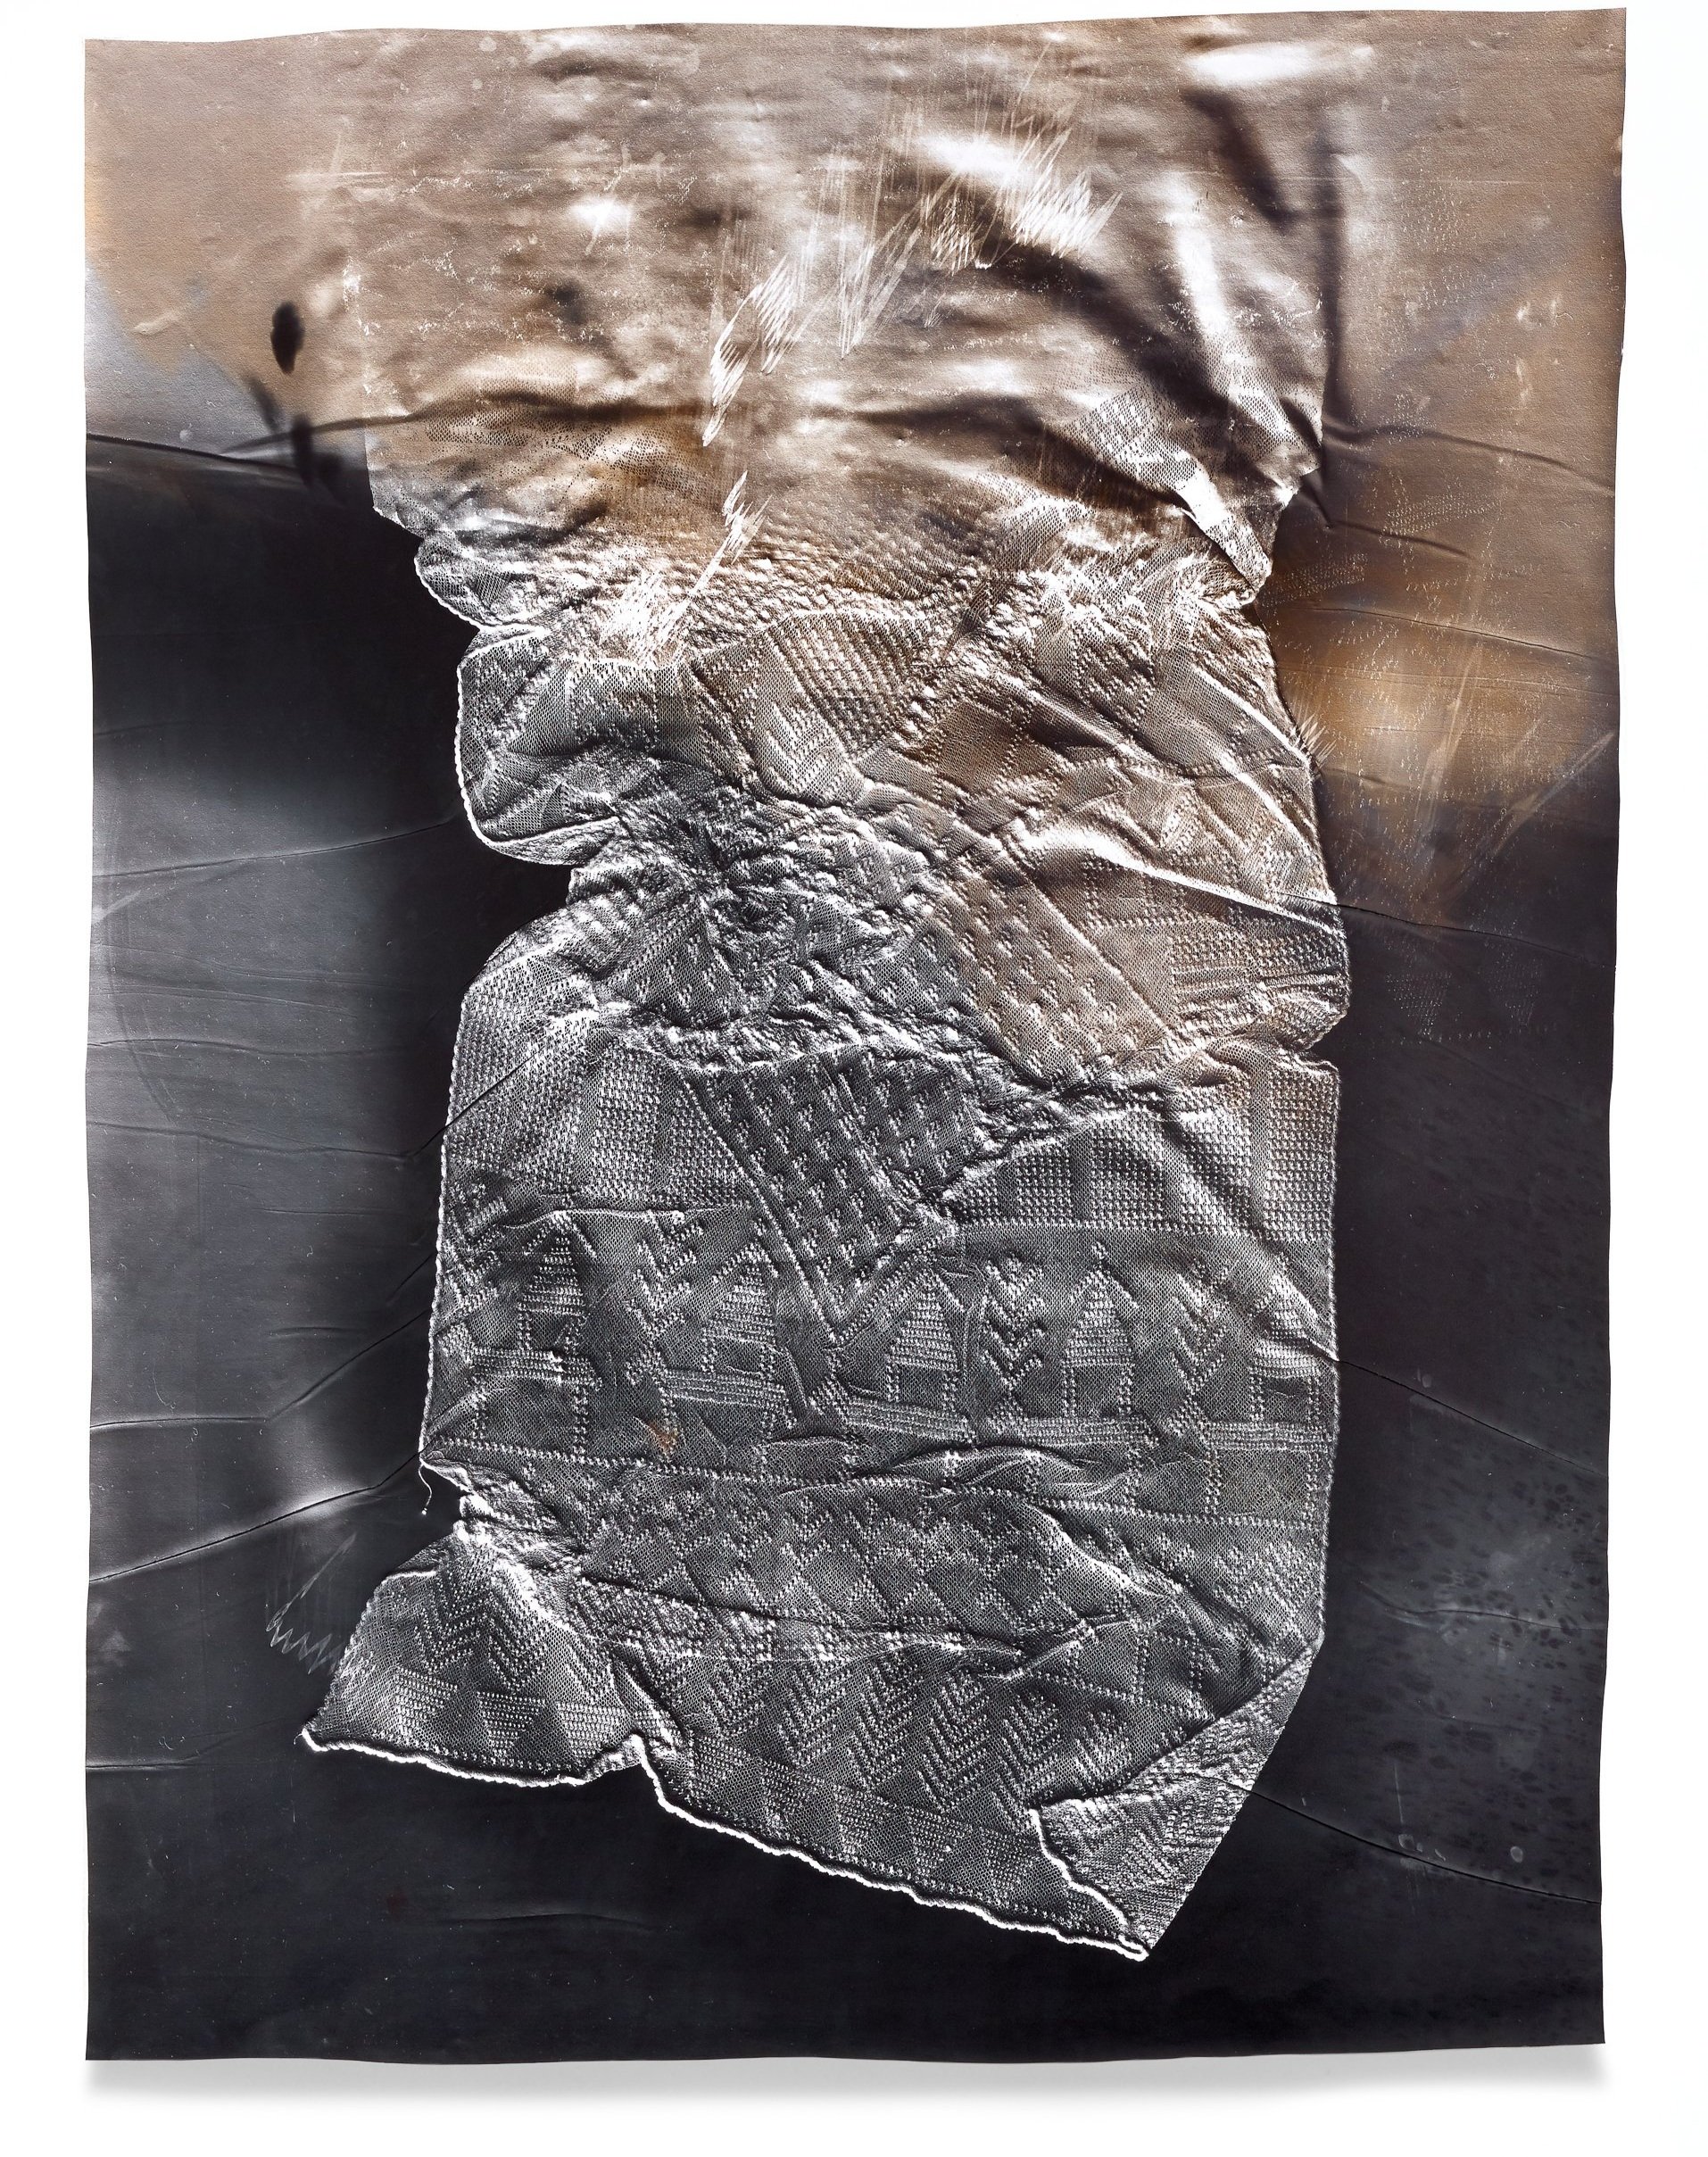   Kingdoms are Clay 1,  2018 Photographic relief (embossed silver gelatin photogram, selenium and sepia toned) Impression of assuit shawl made of linen and silver (Egypt, 1920s) 42 x 32 in 